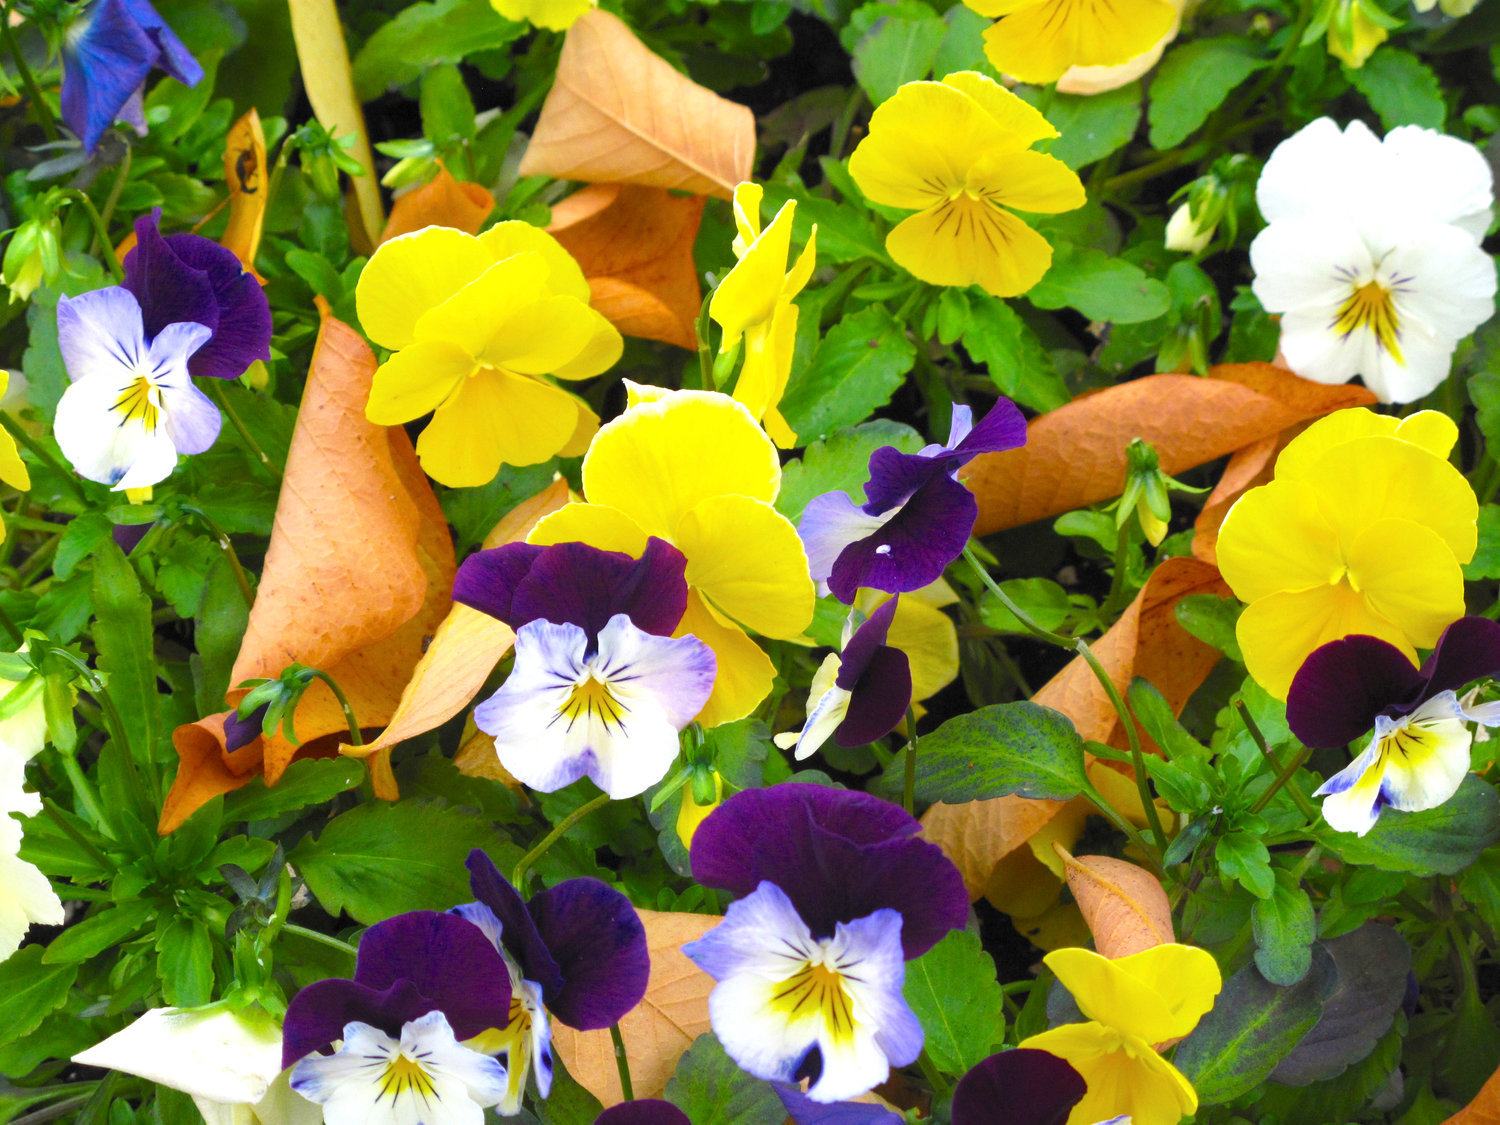 1. Buying pansy seeds